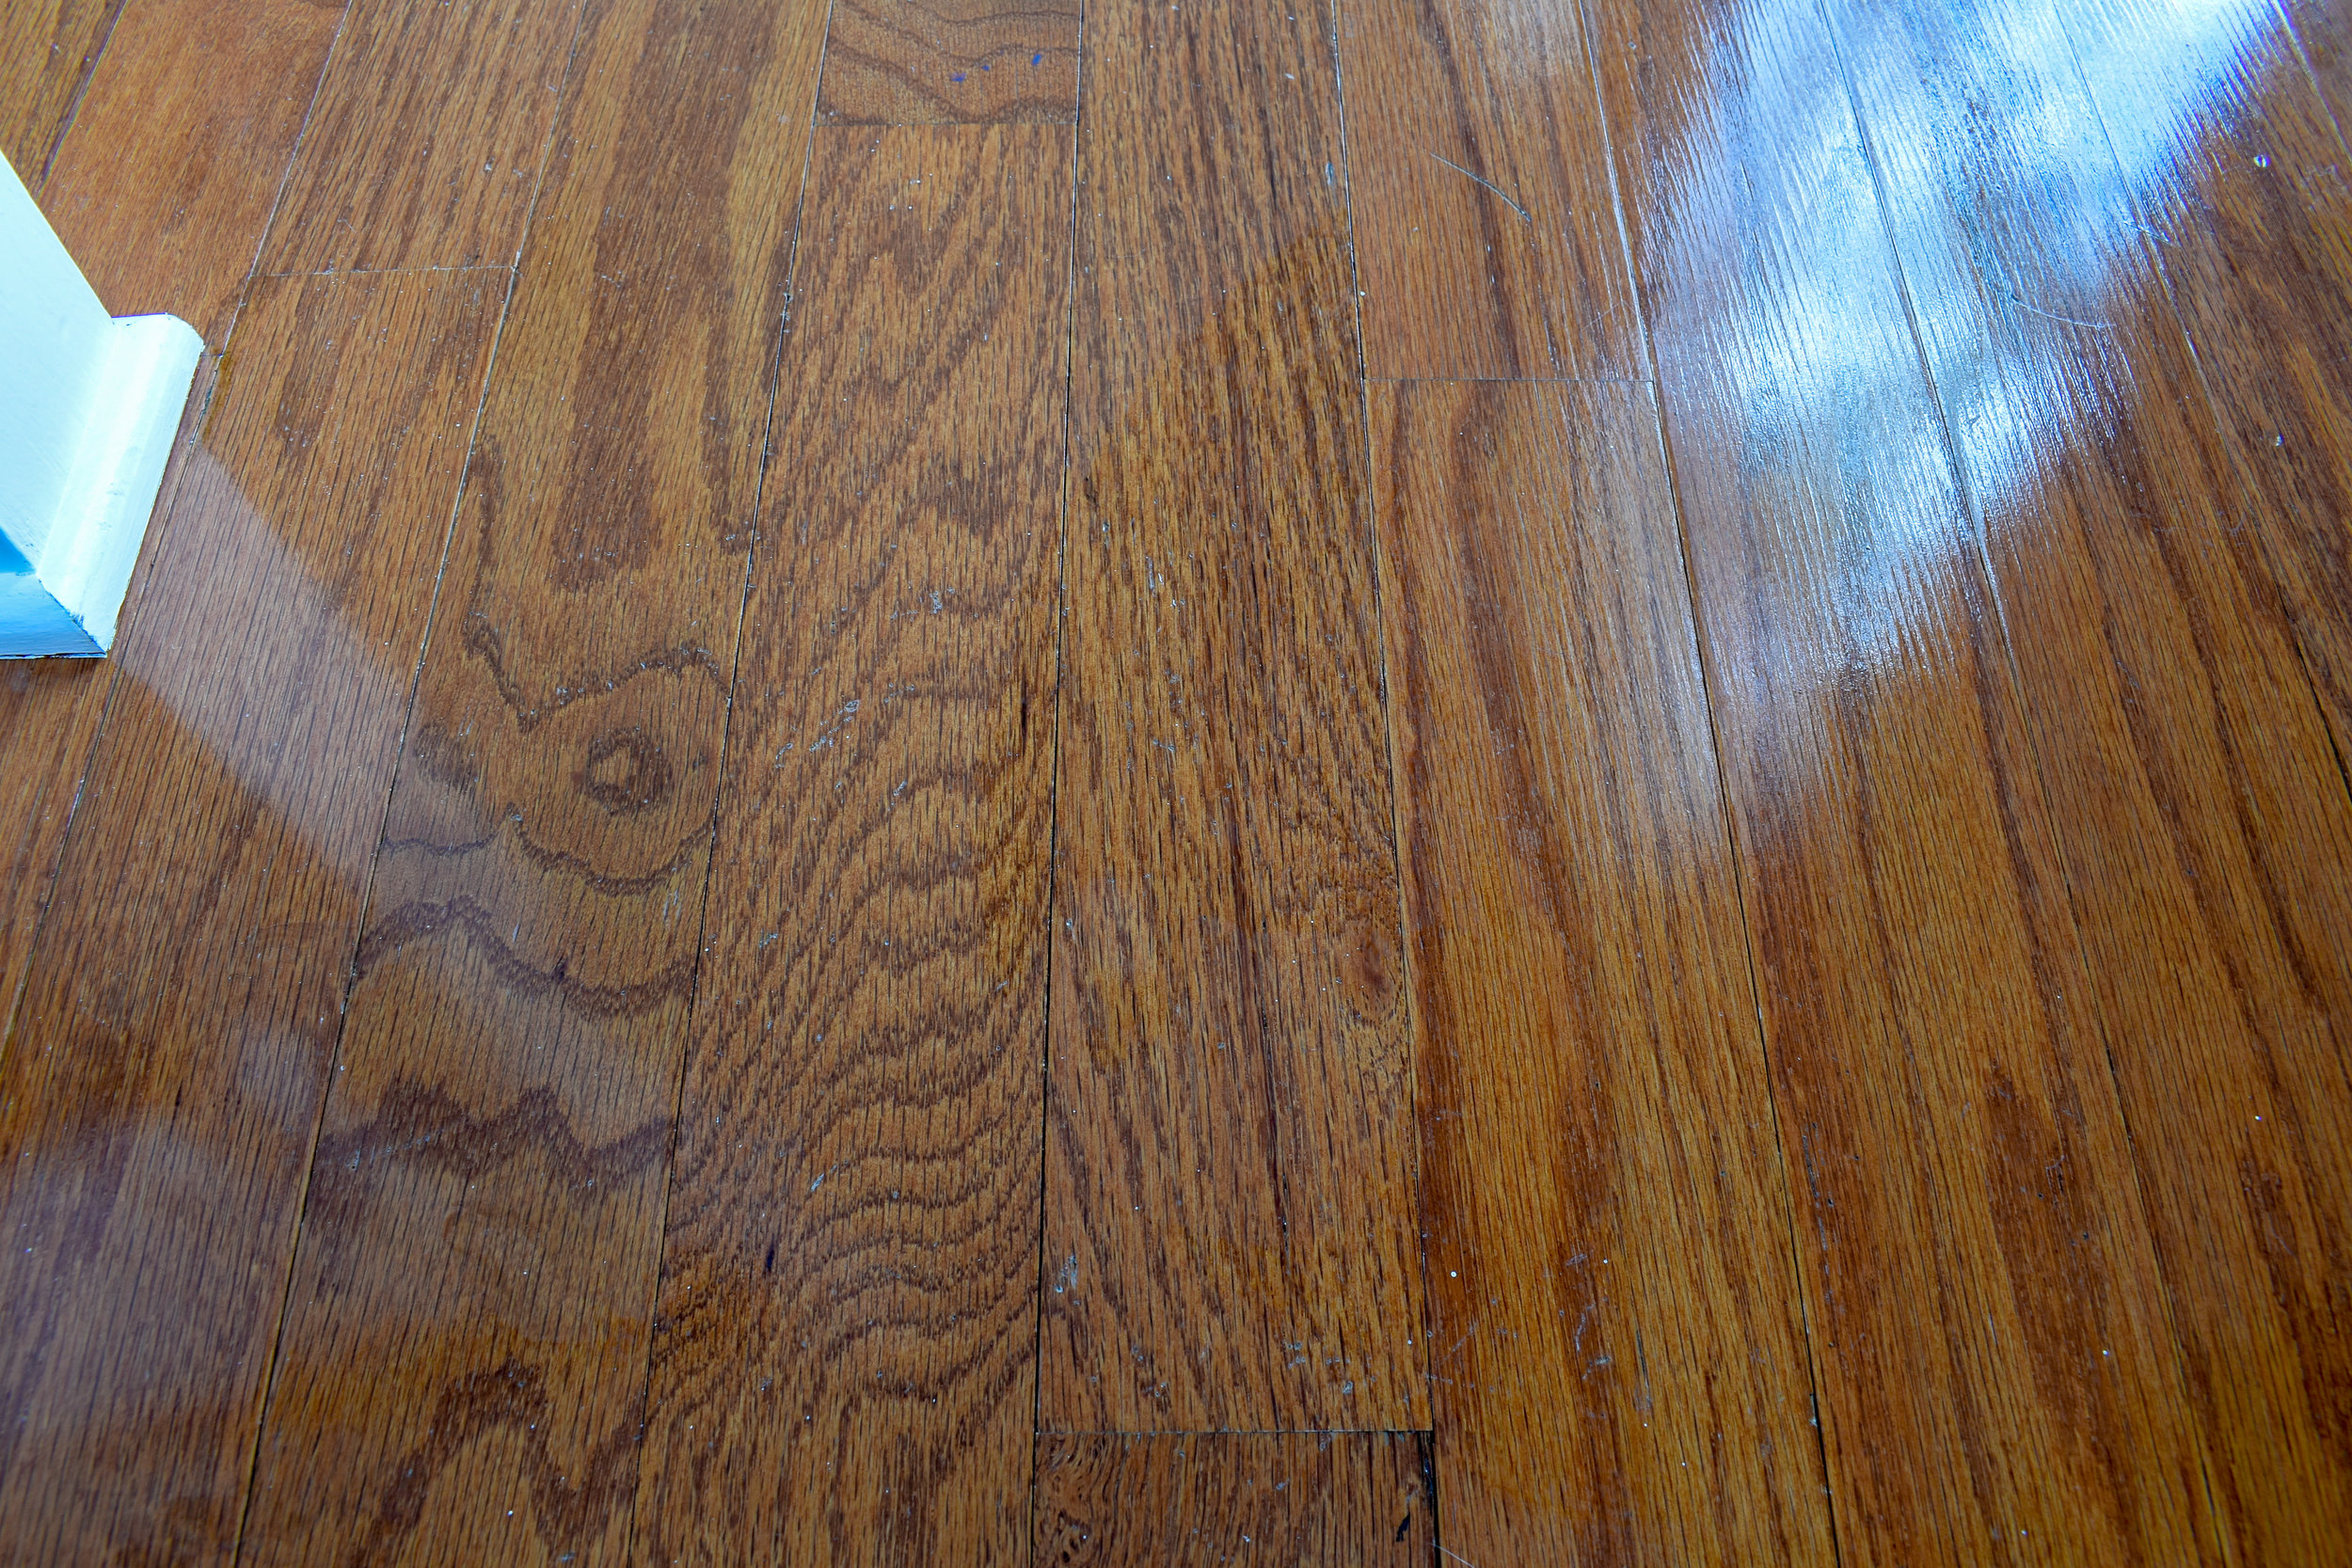 How to remove spilled varnish from hardwood floors